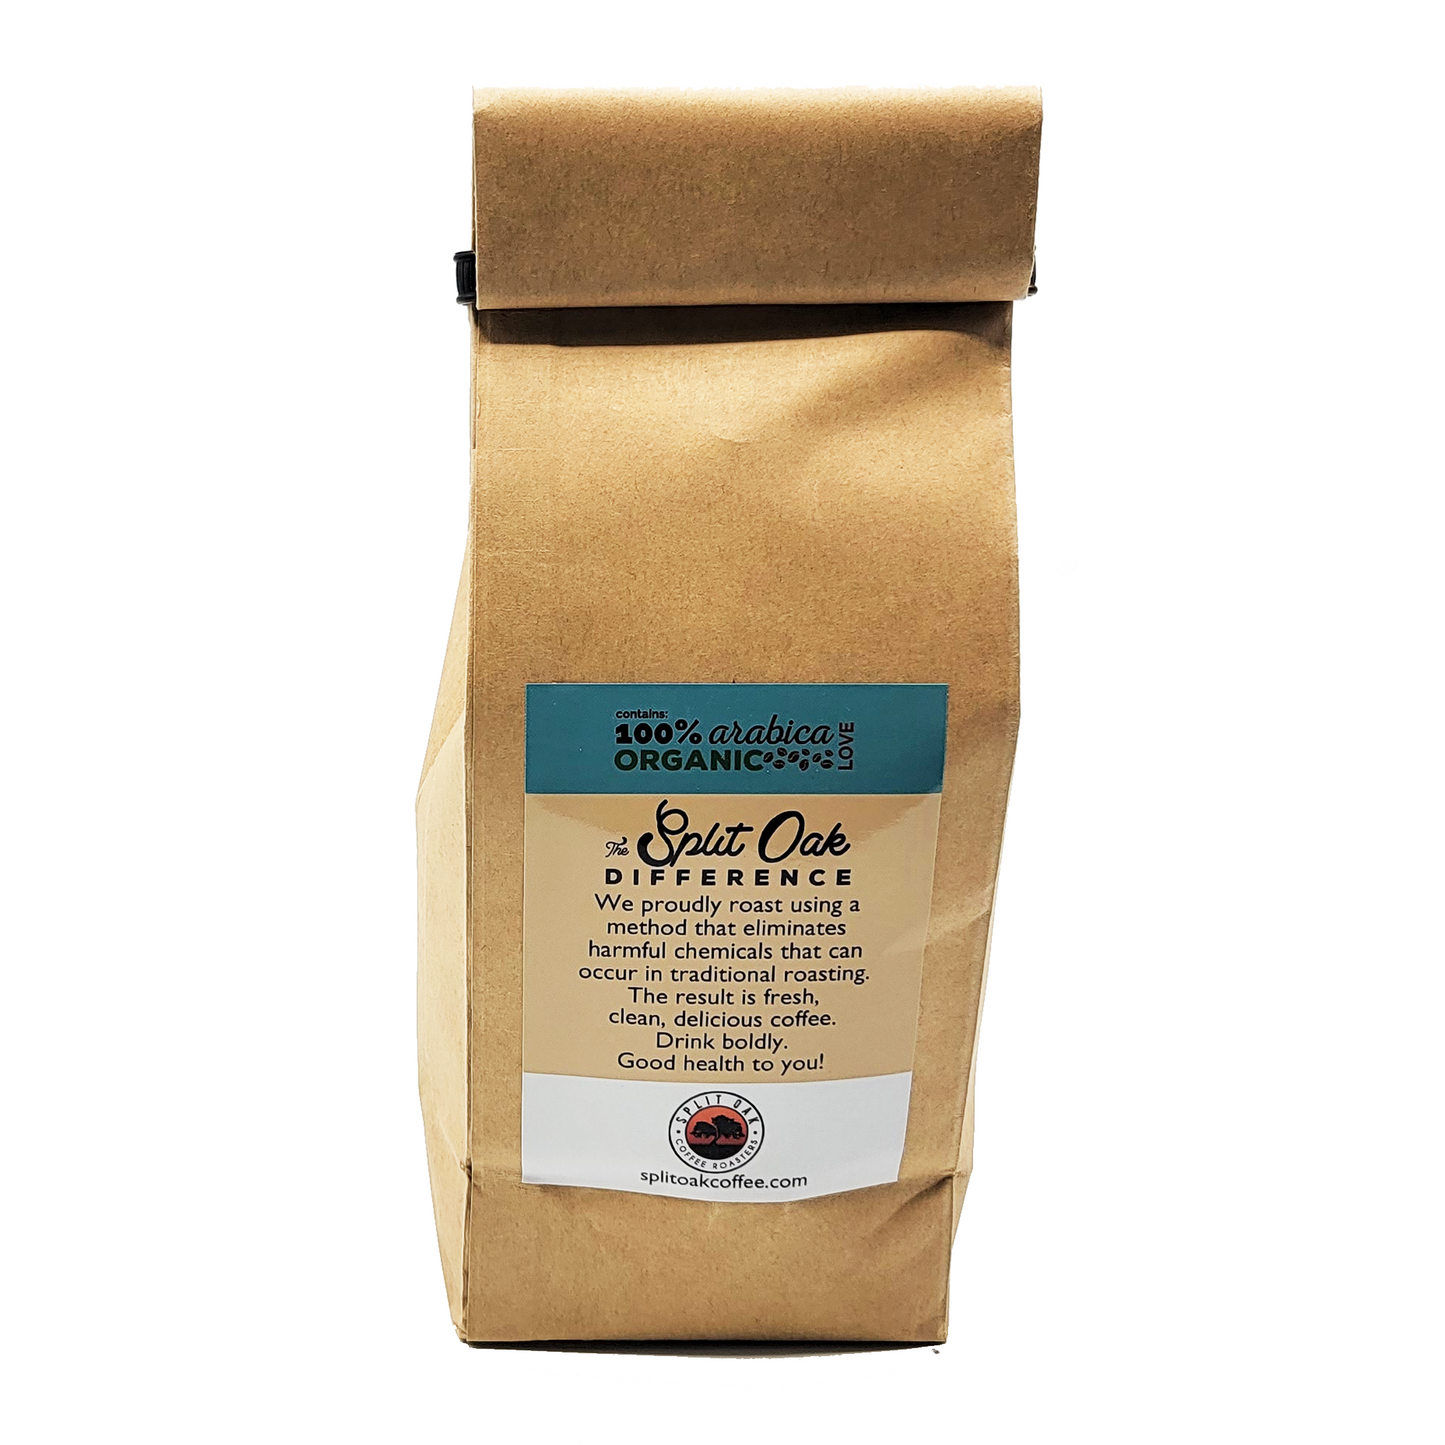 Medium Roasted Coffee Brazil Cerrado 12 oz Whole Beans with a deep, nutty flavor and hints of almond and cocoa.